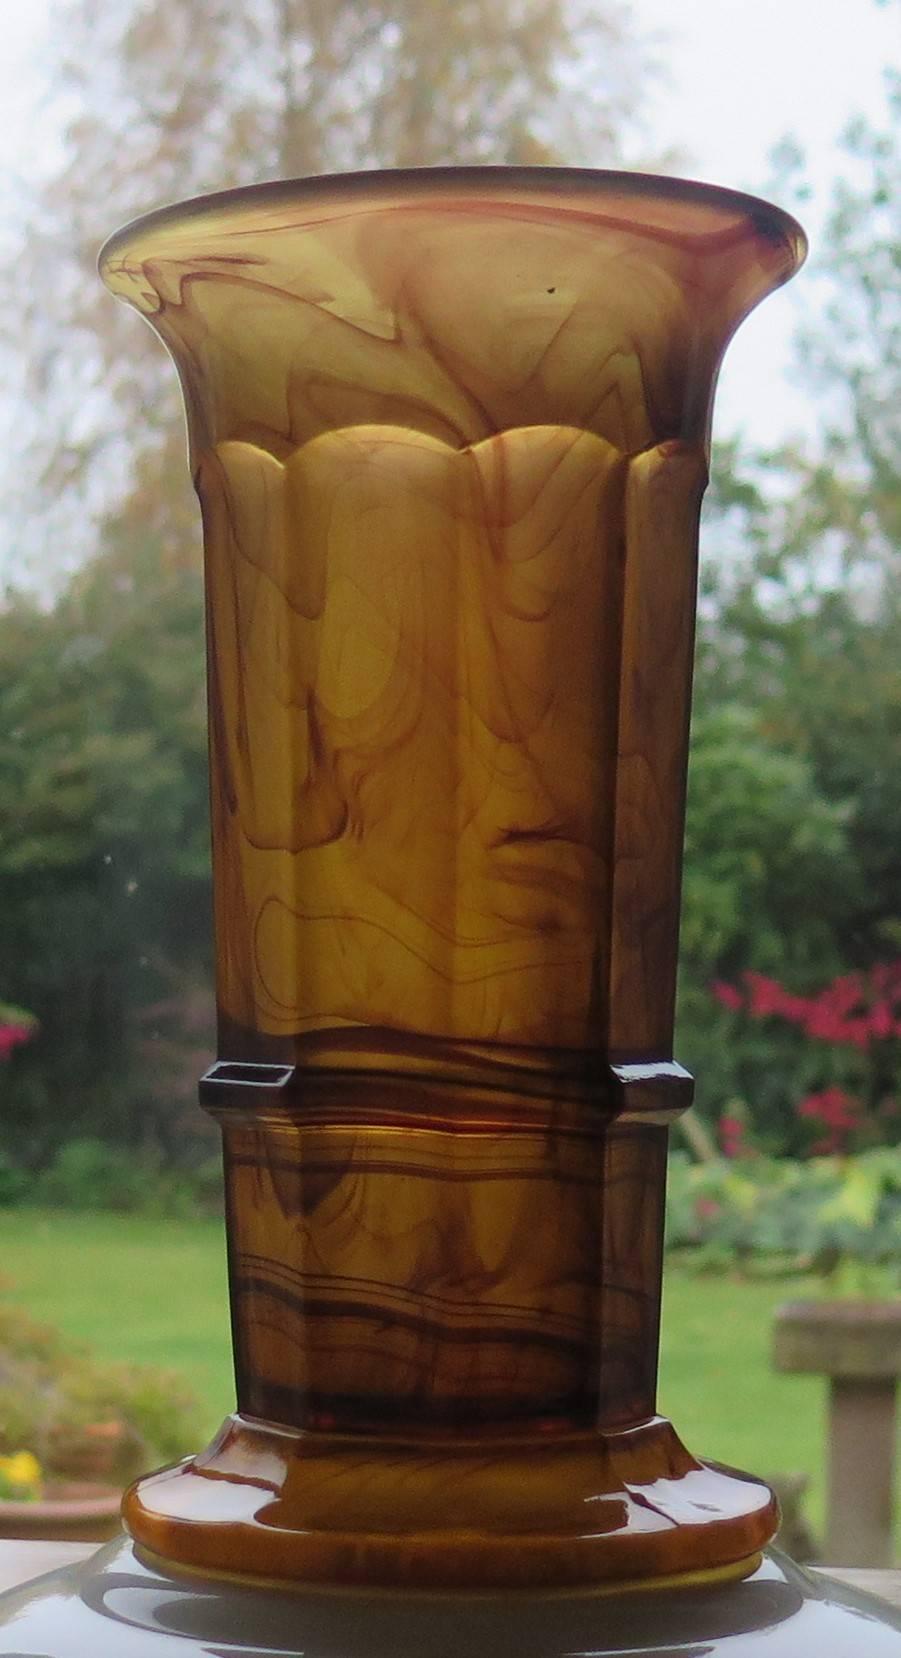 This beautiful glass vase is made by George Davidson & Co. of Gateshead, England who started production of cloud glass in 1923.

This is there column vase shape or pattern 279 and is seen in their catalogues of 1931.The vase is polished on the